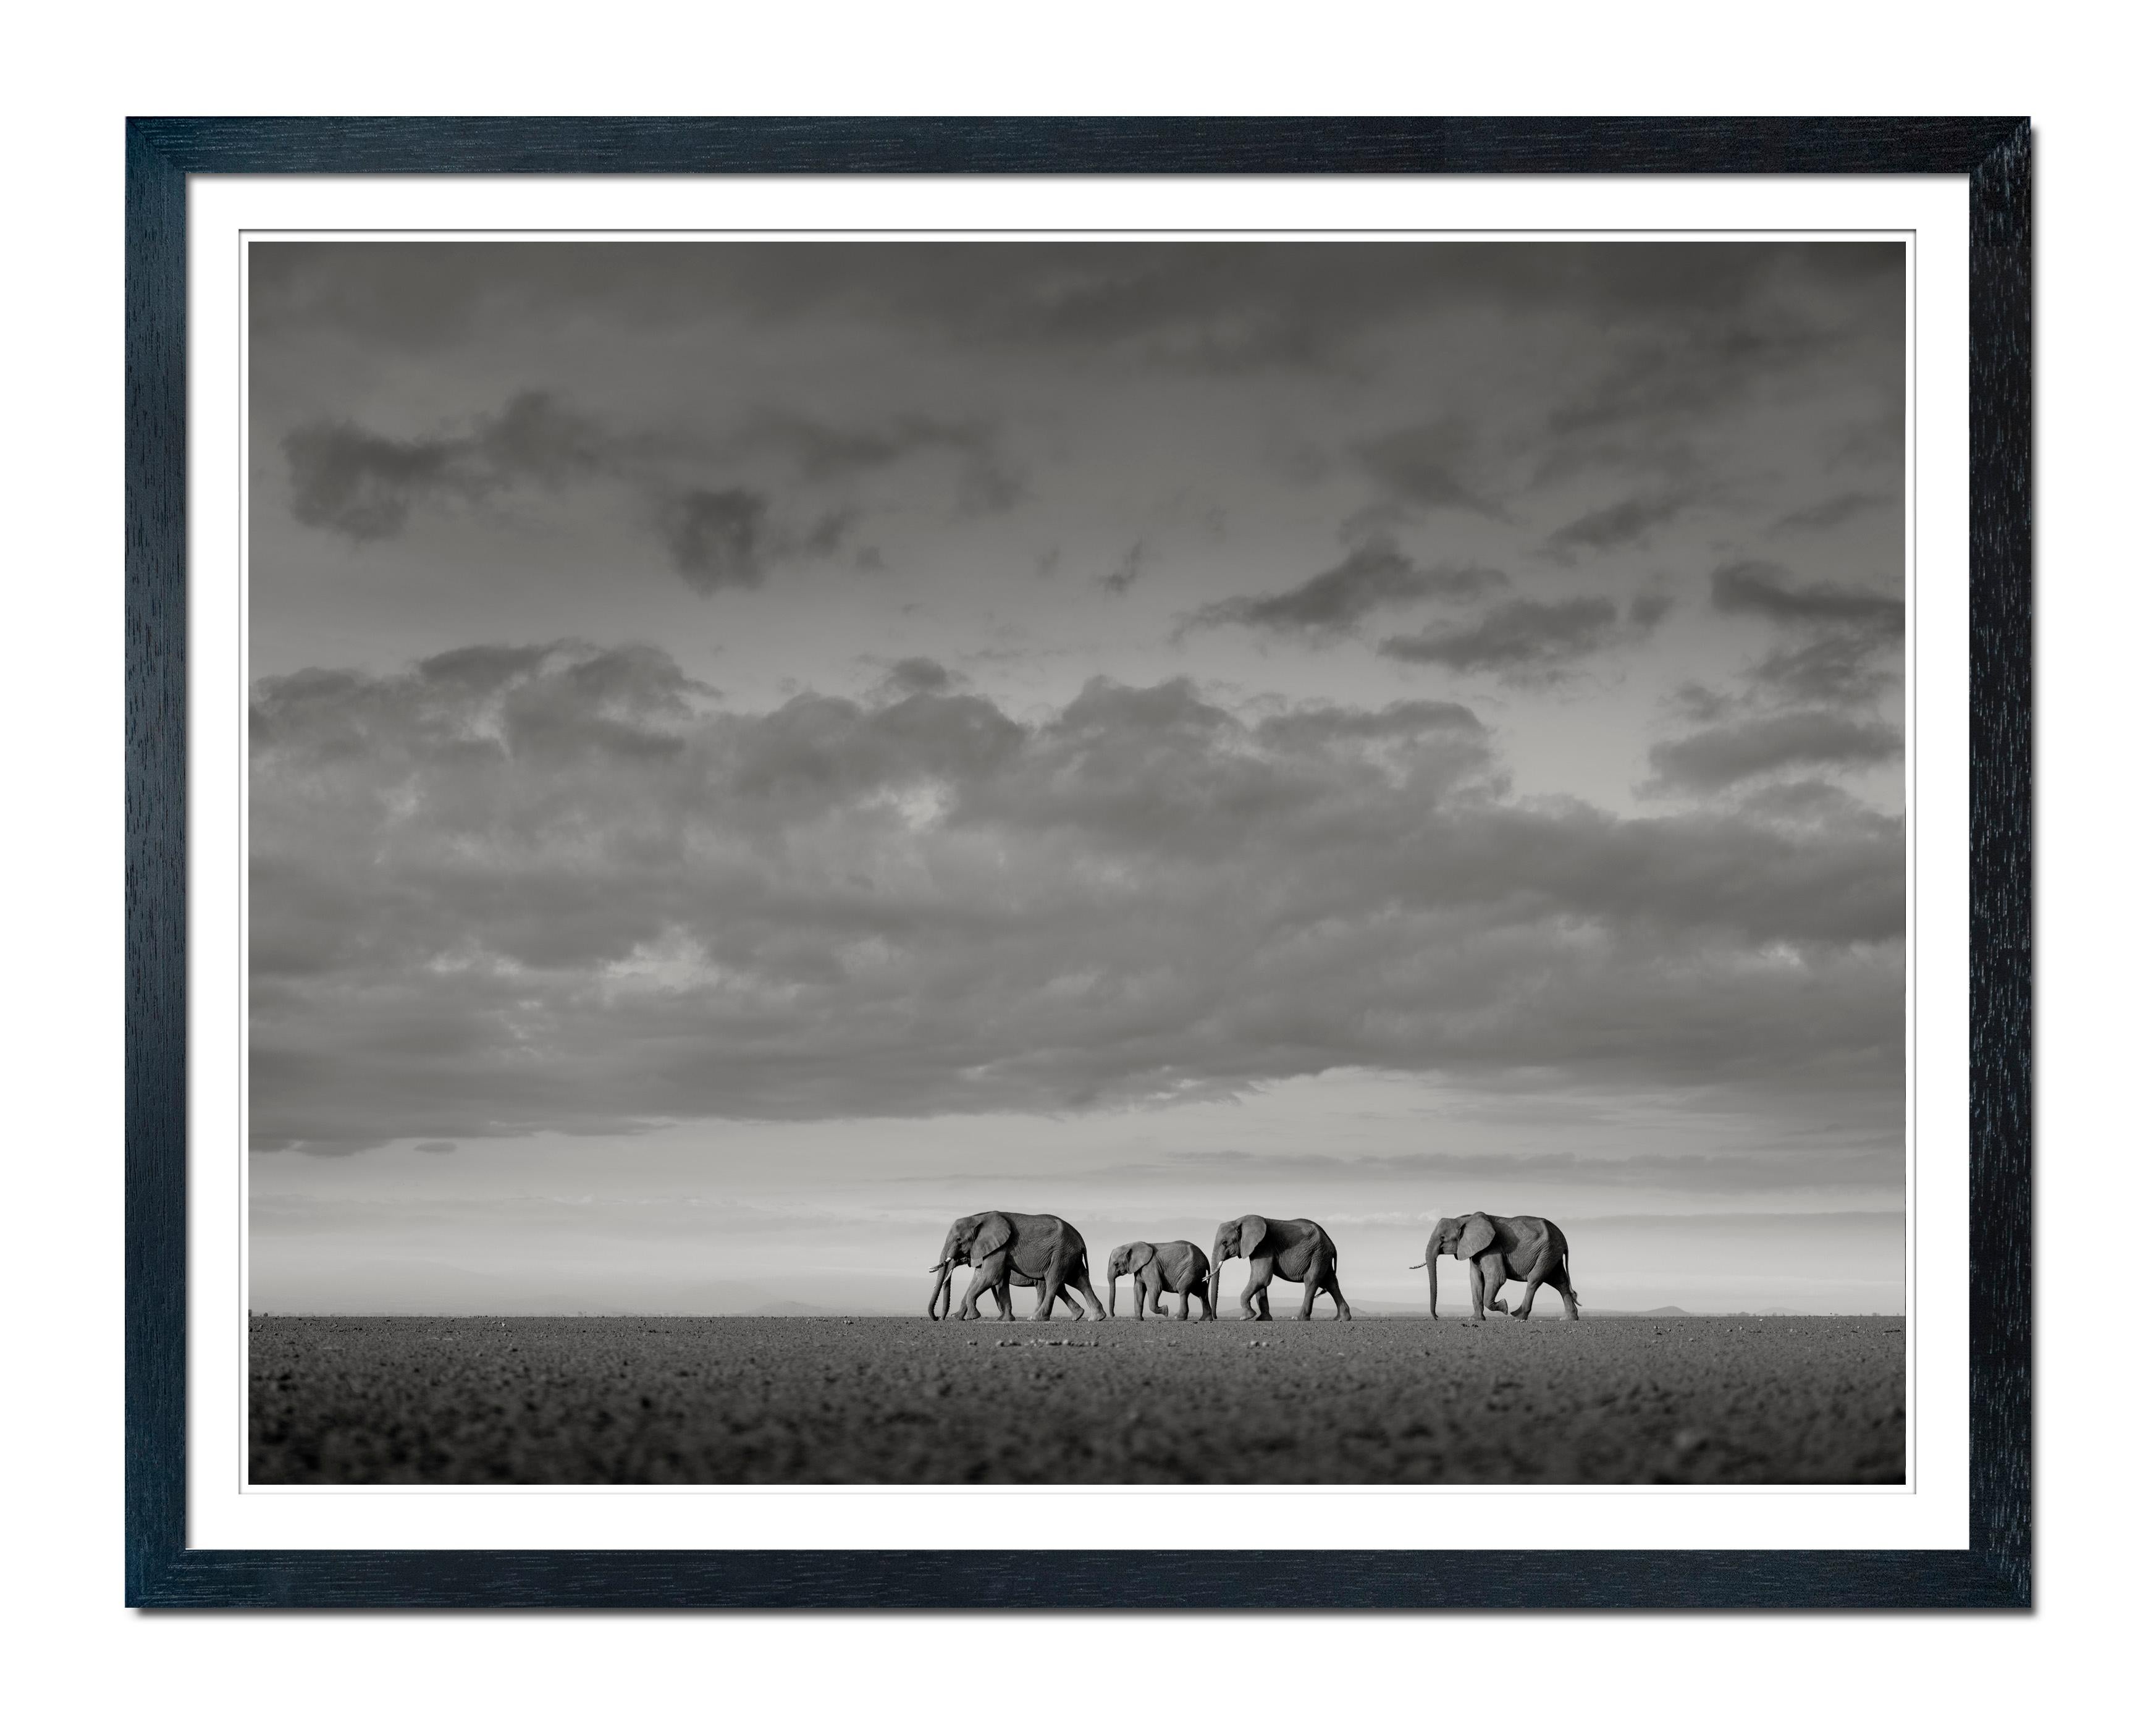 Elephants crossing, animal, wildlife, black and white photography, africa - Photograph by Joachim Schmeisser